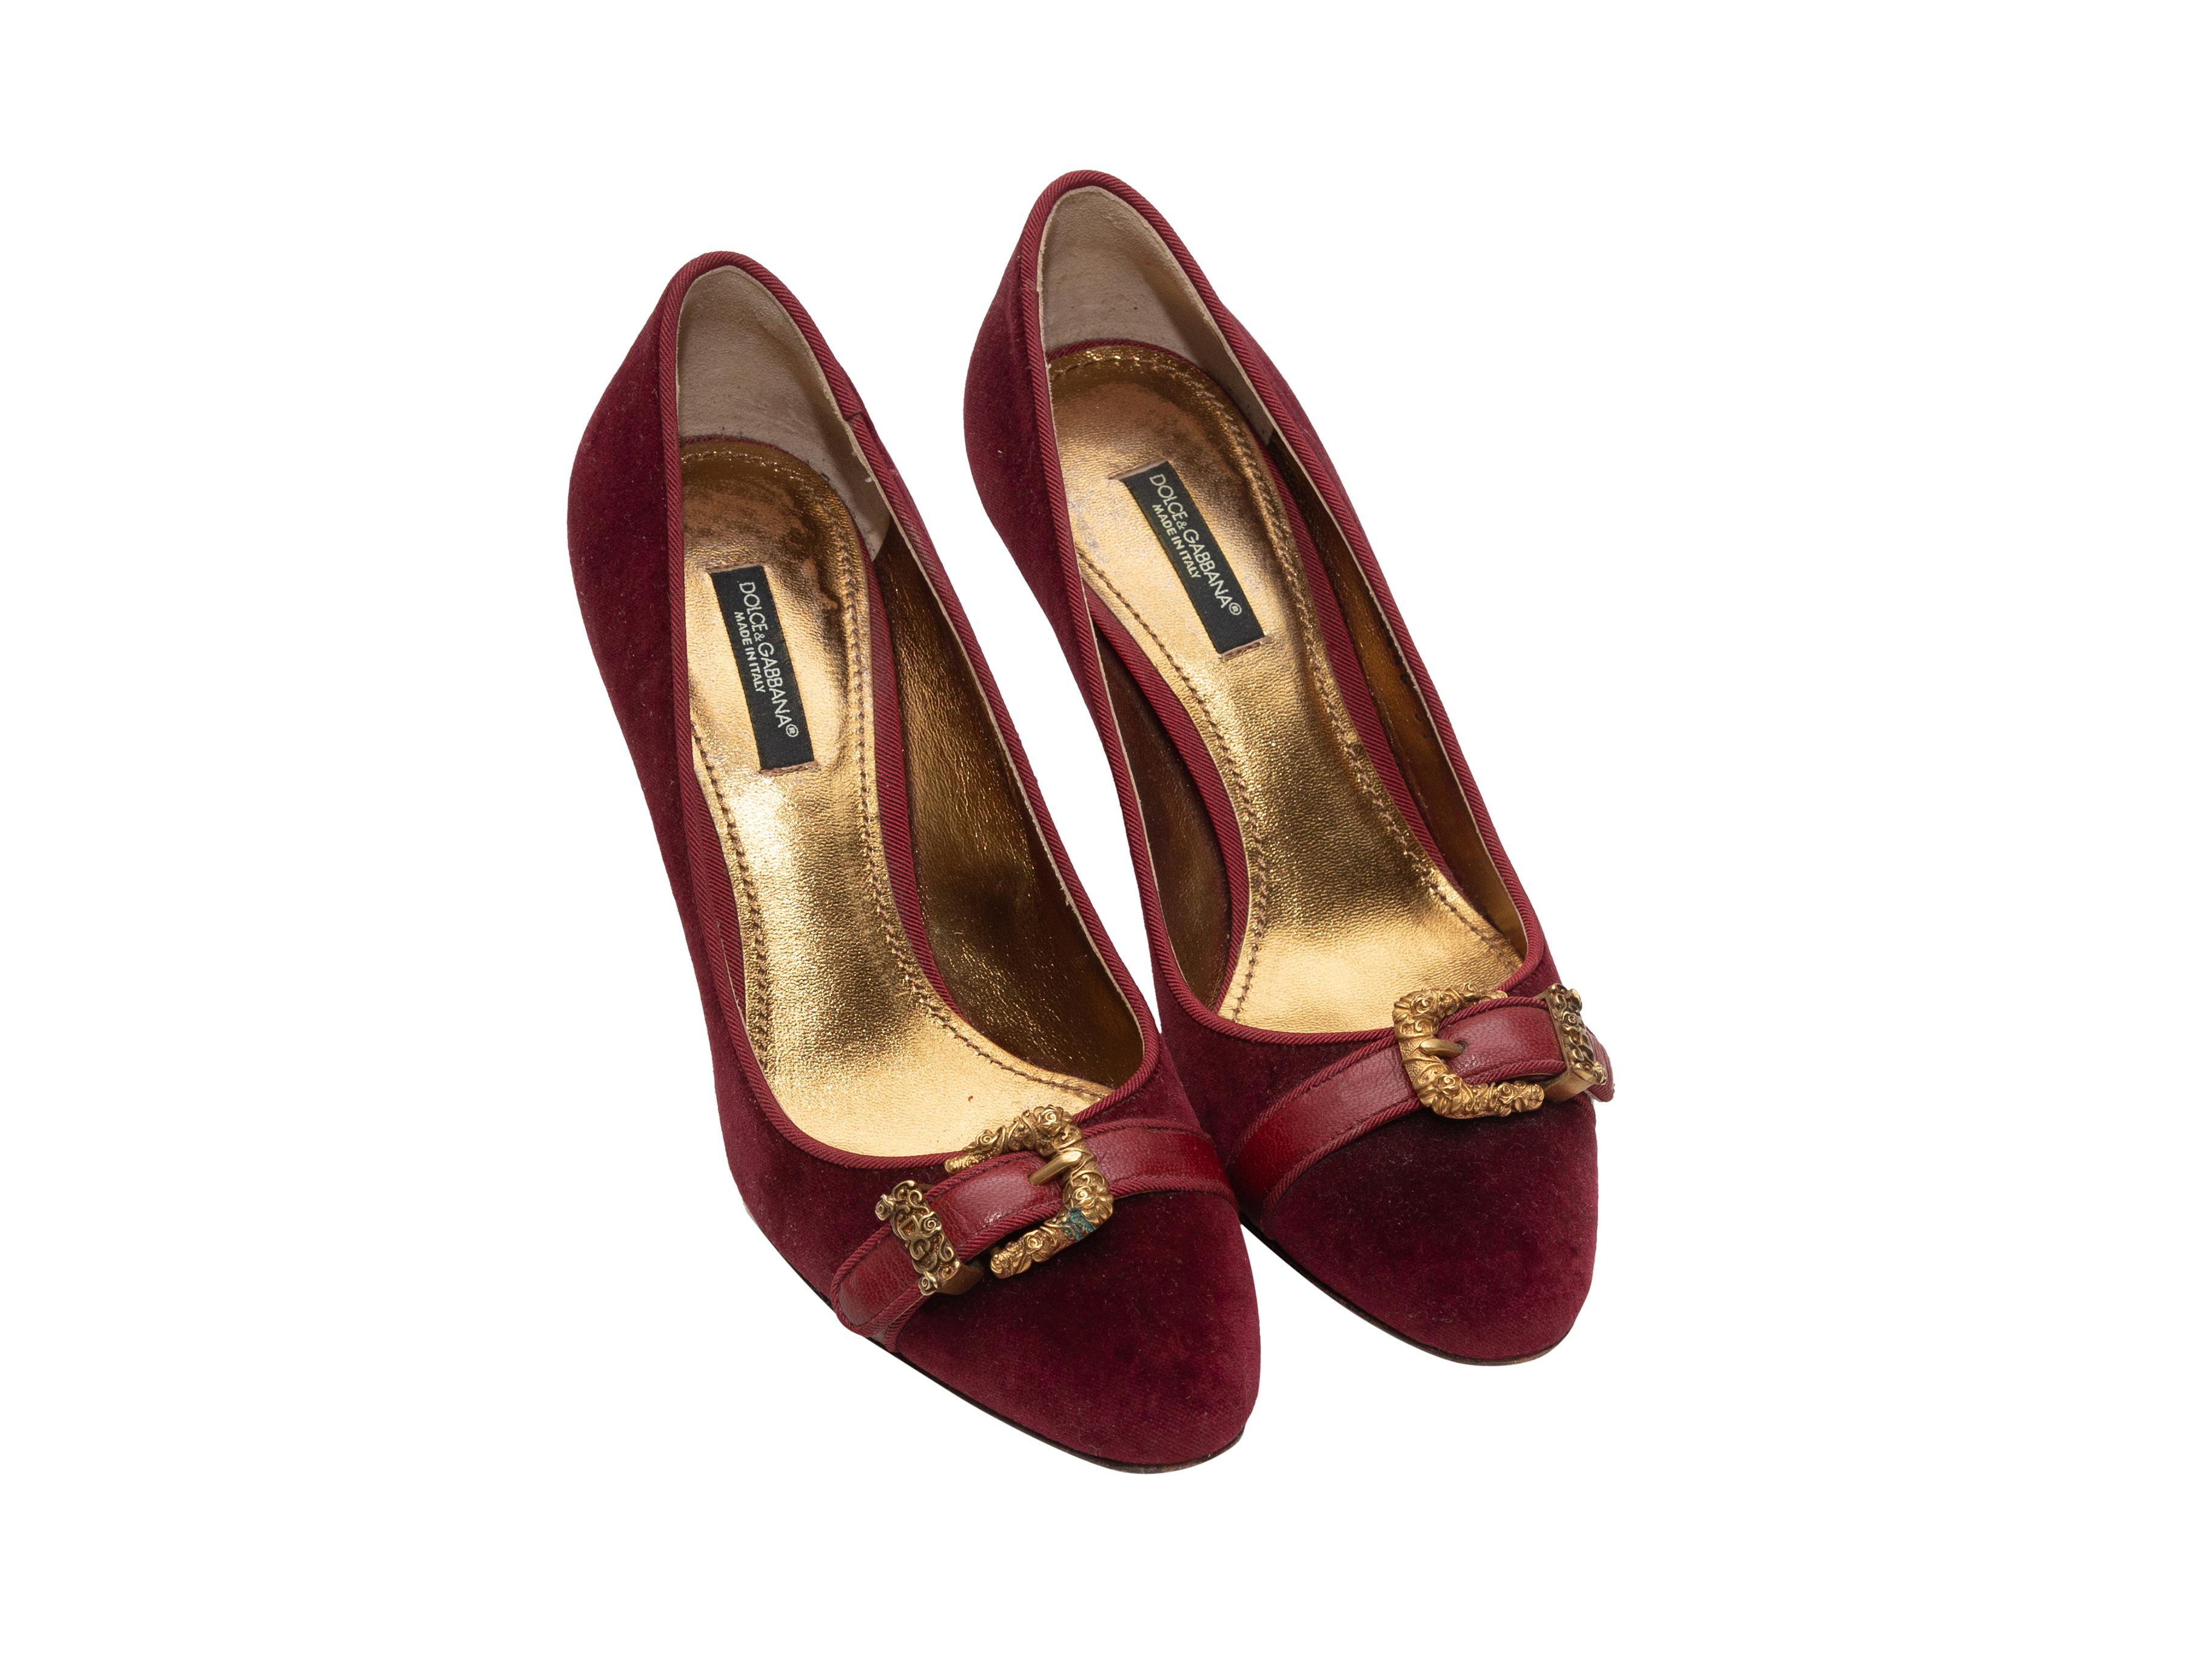 Product details: Wine velvet pumps by Dolce & Gabbana. Gold-tone buckle accents at toes. 3.5